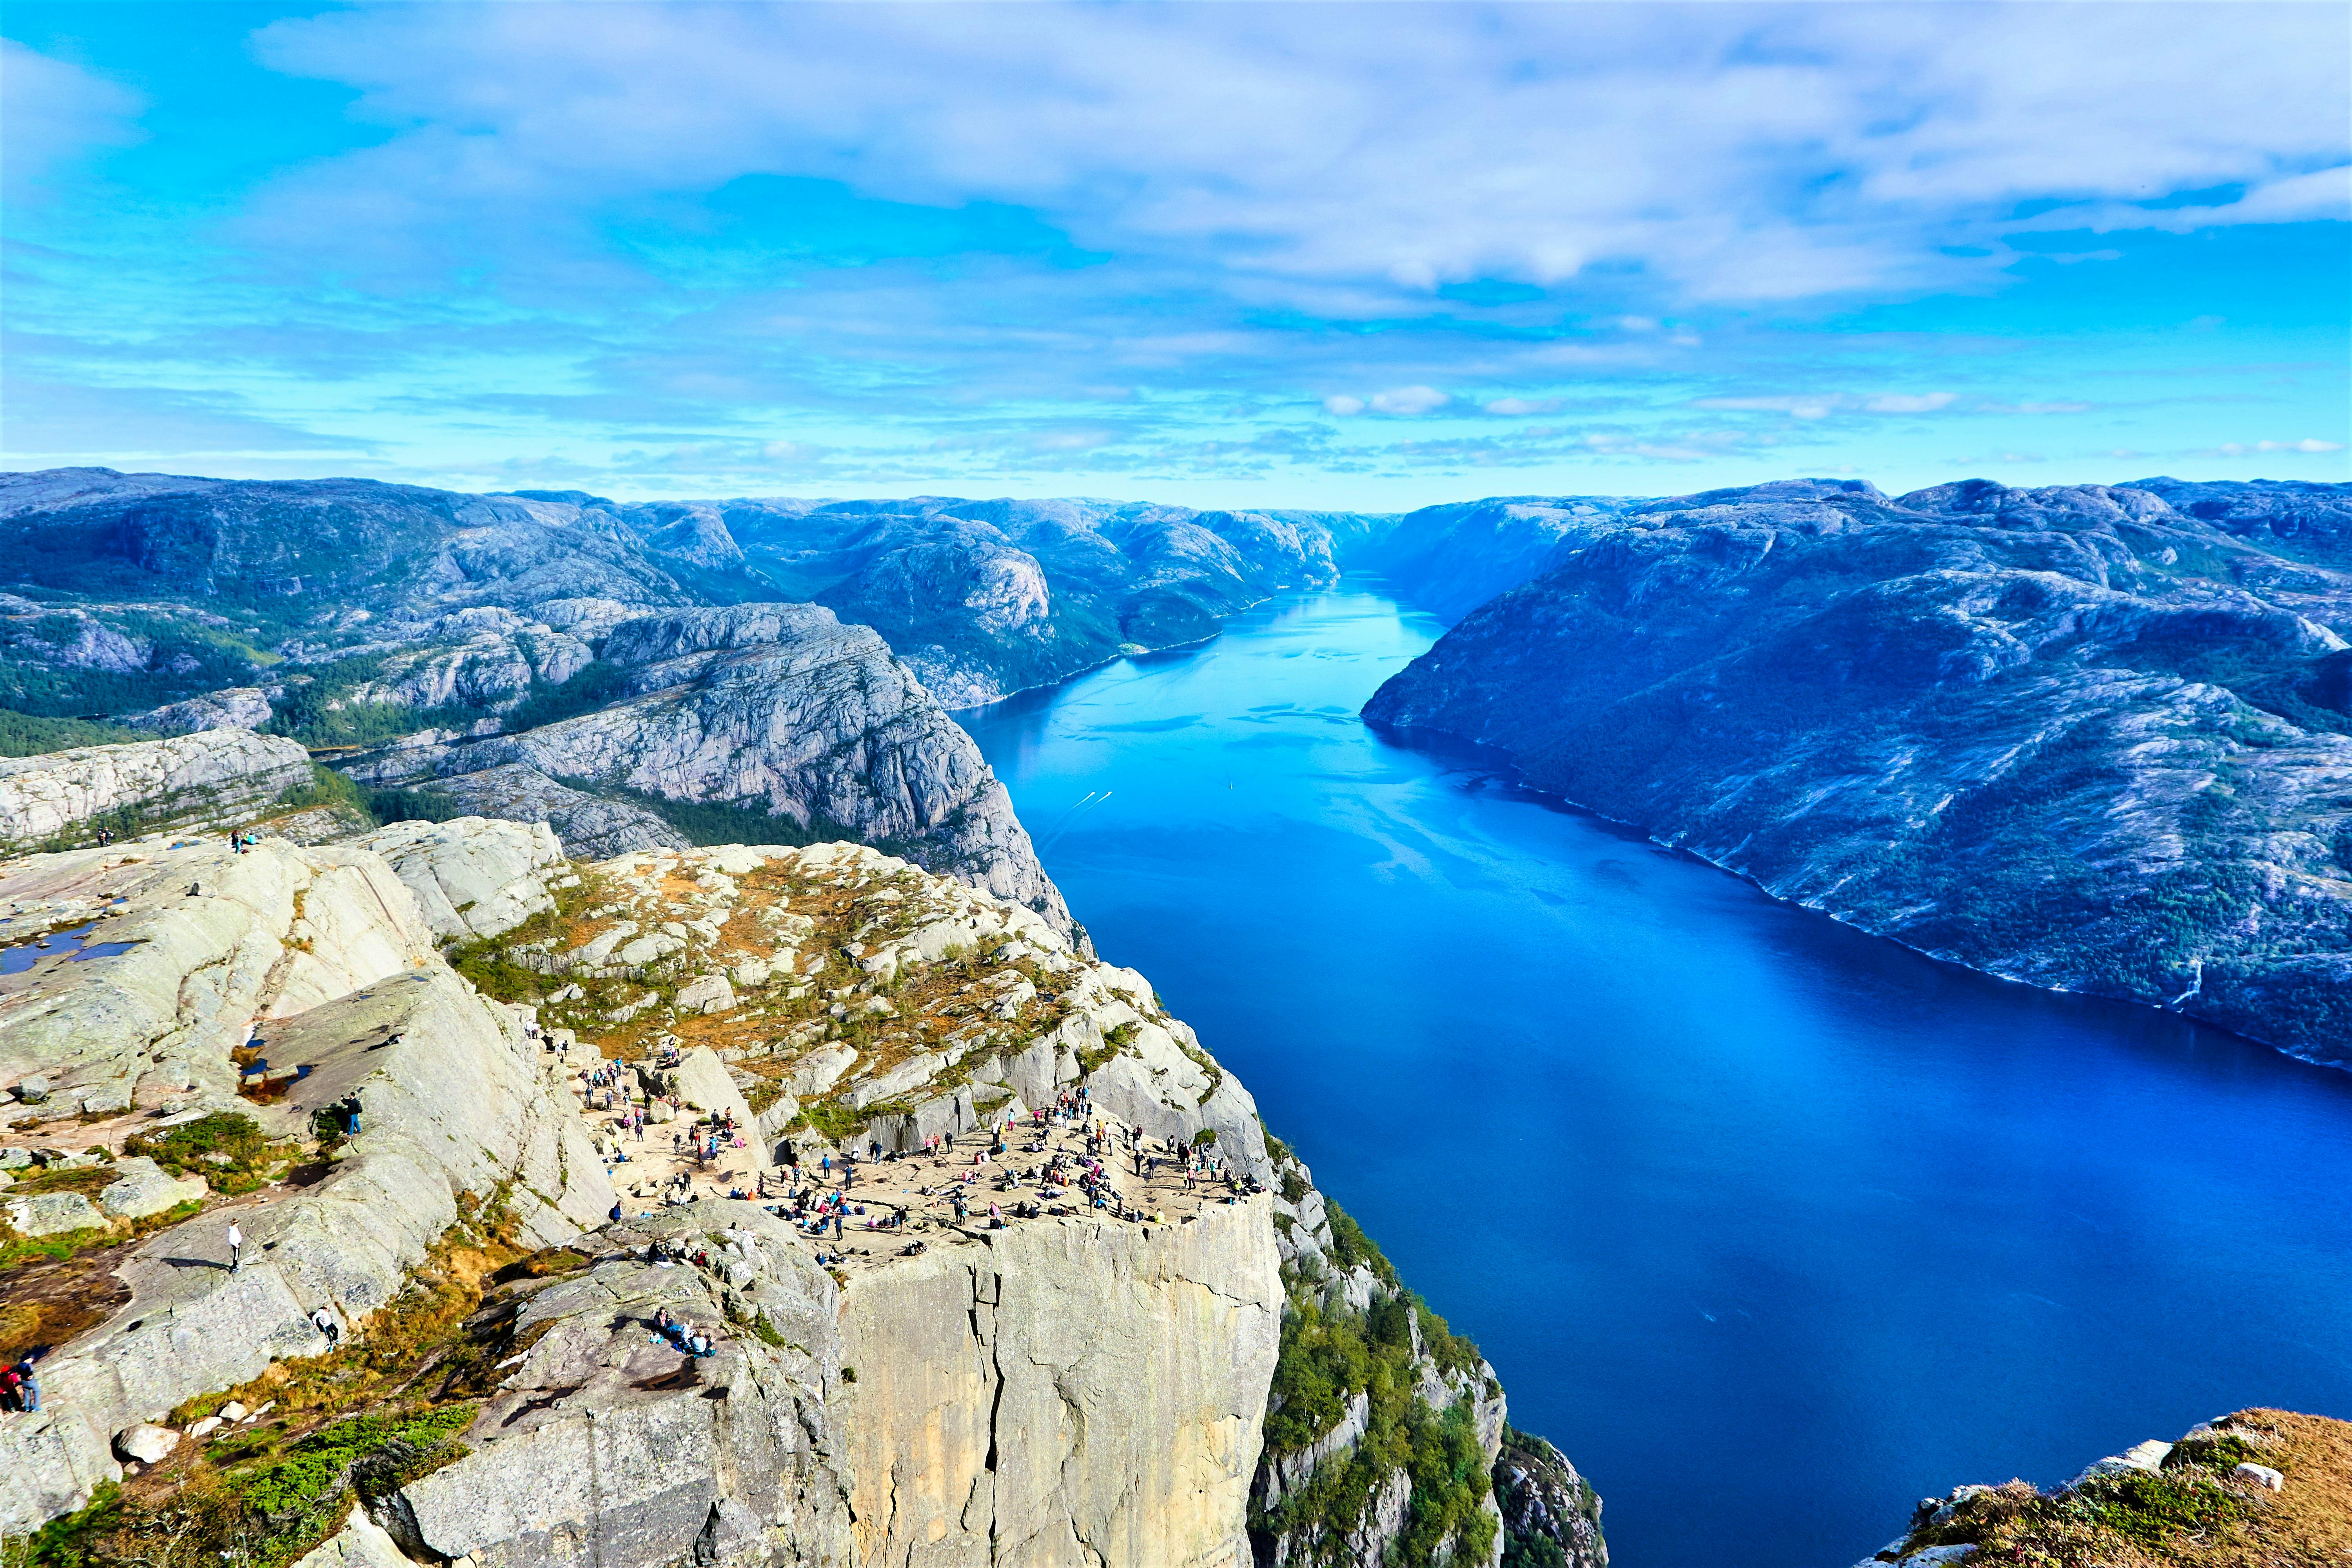 Hike, Kayak and Wild Camp the Norwegian Fjords